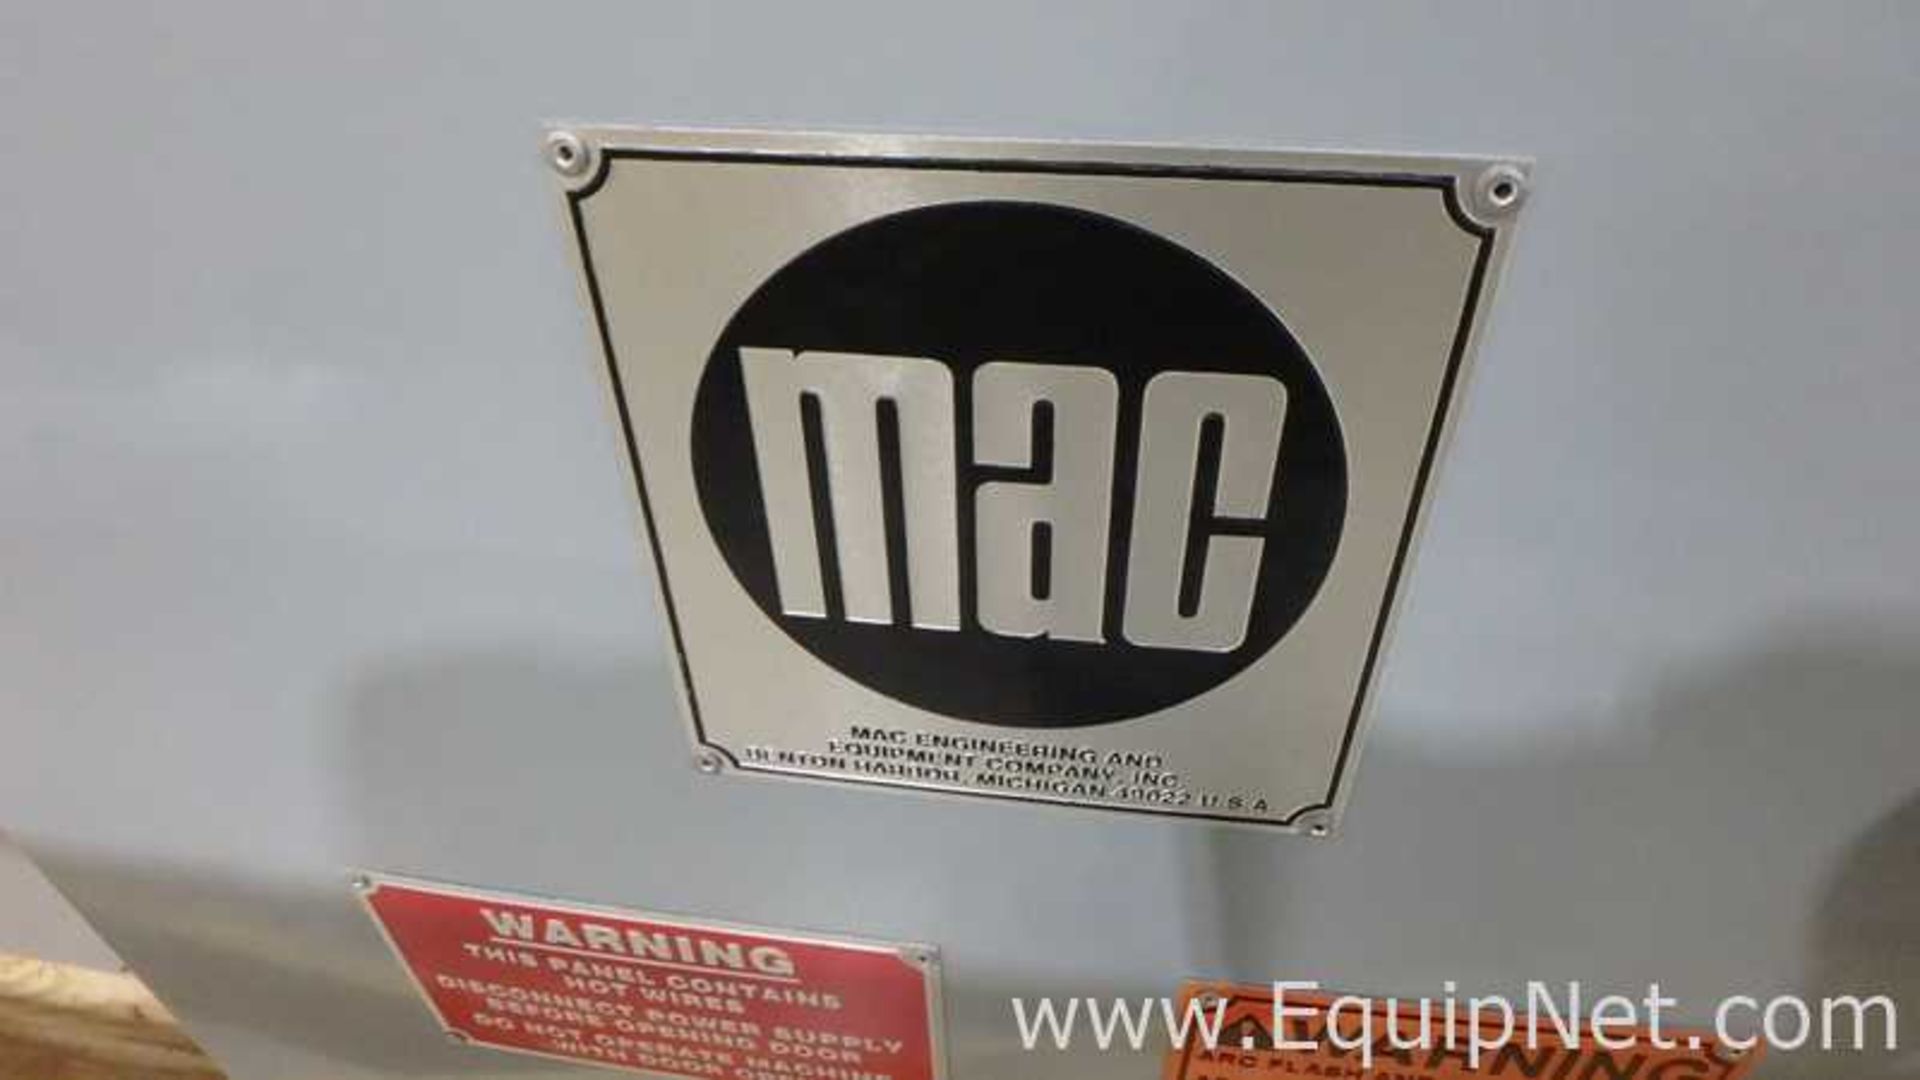 Unused MAC Engineering Dry/Chill/Trim/Oven Includes Trimming Station - Image 10 of 11